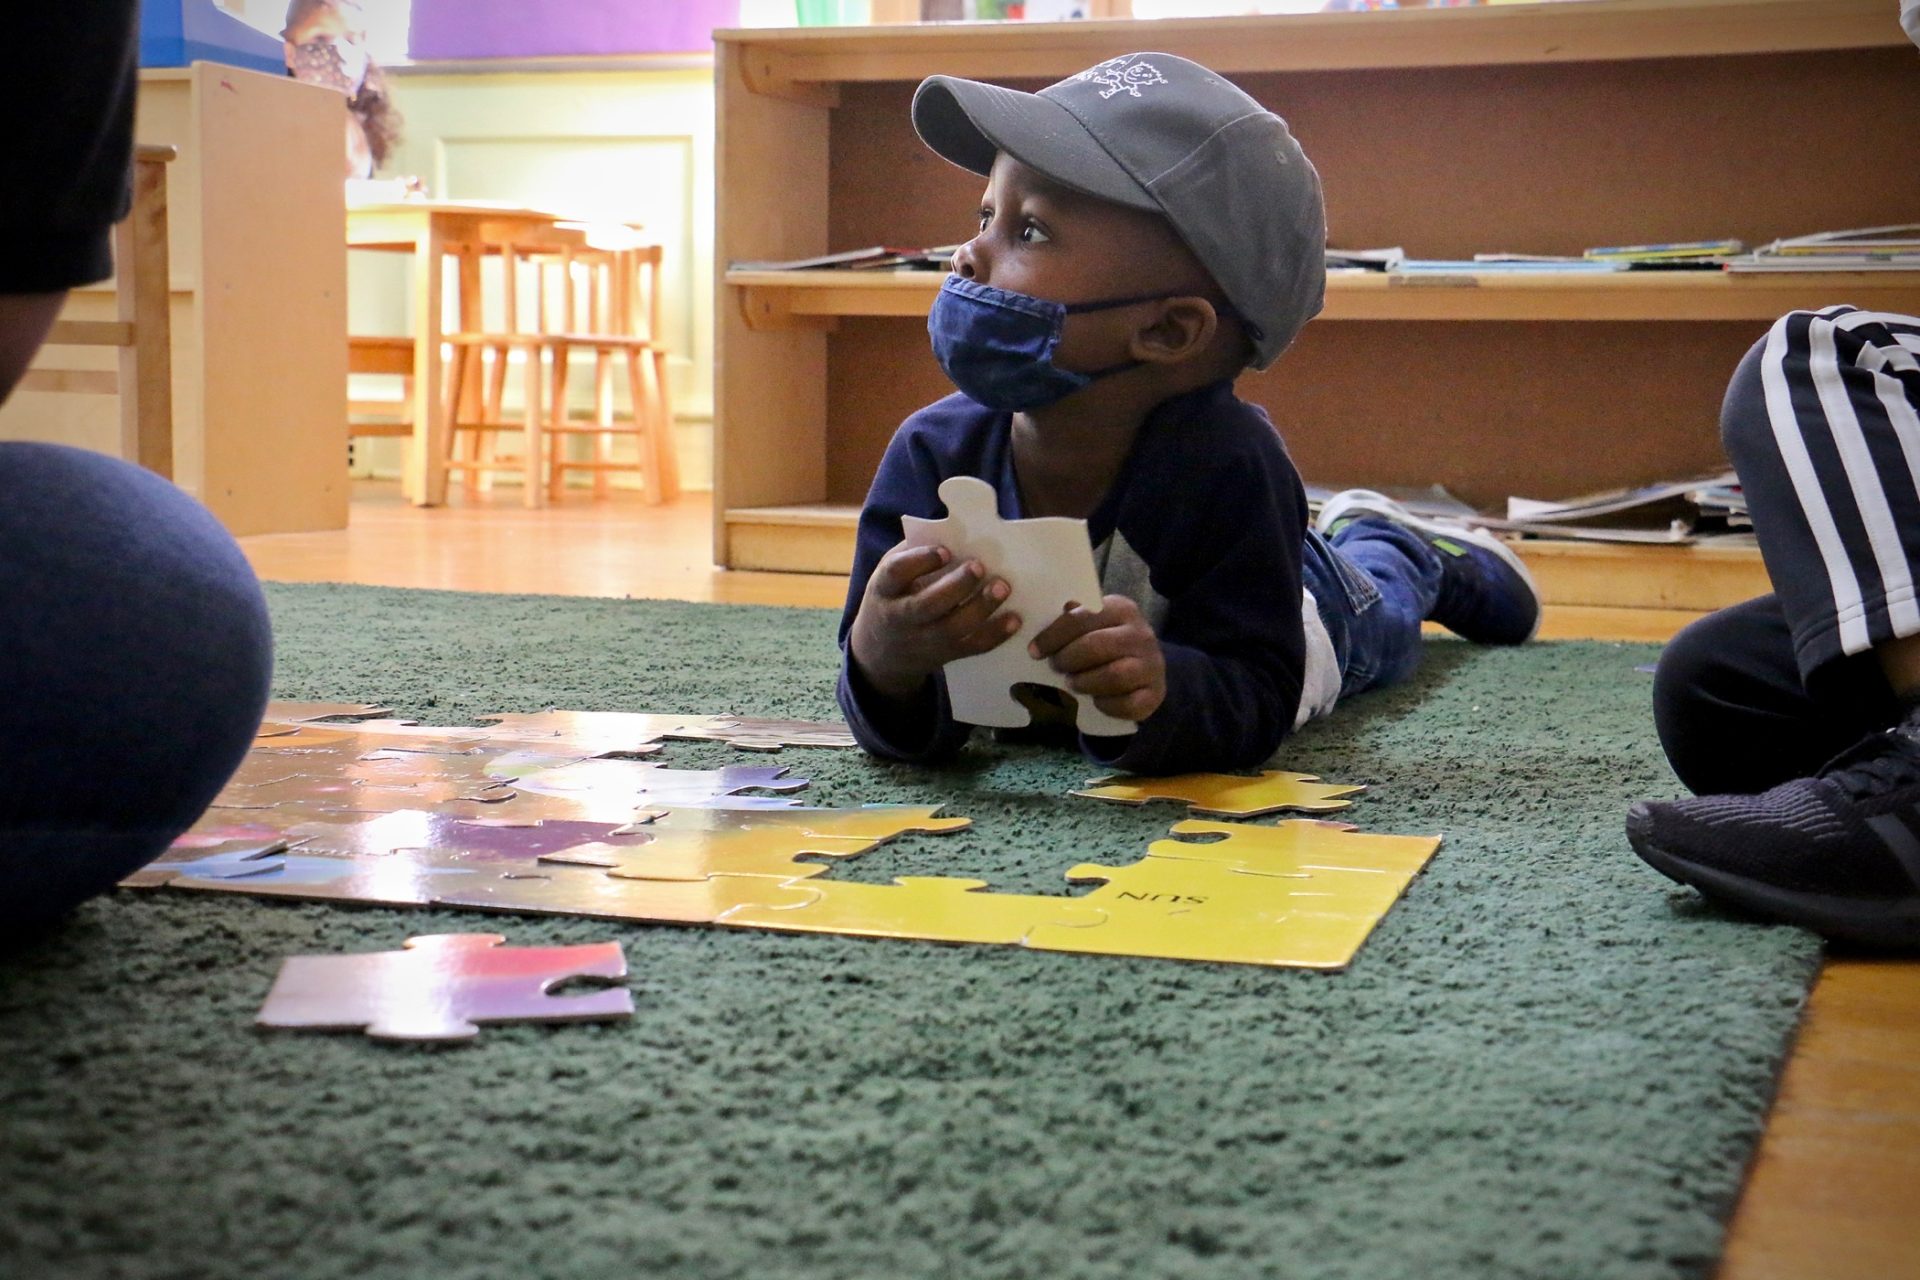 Gabriel Watson, 3, works on a puzzle during his preschool class at Children’s Playhouse Whitman in South Philadelphia. (